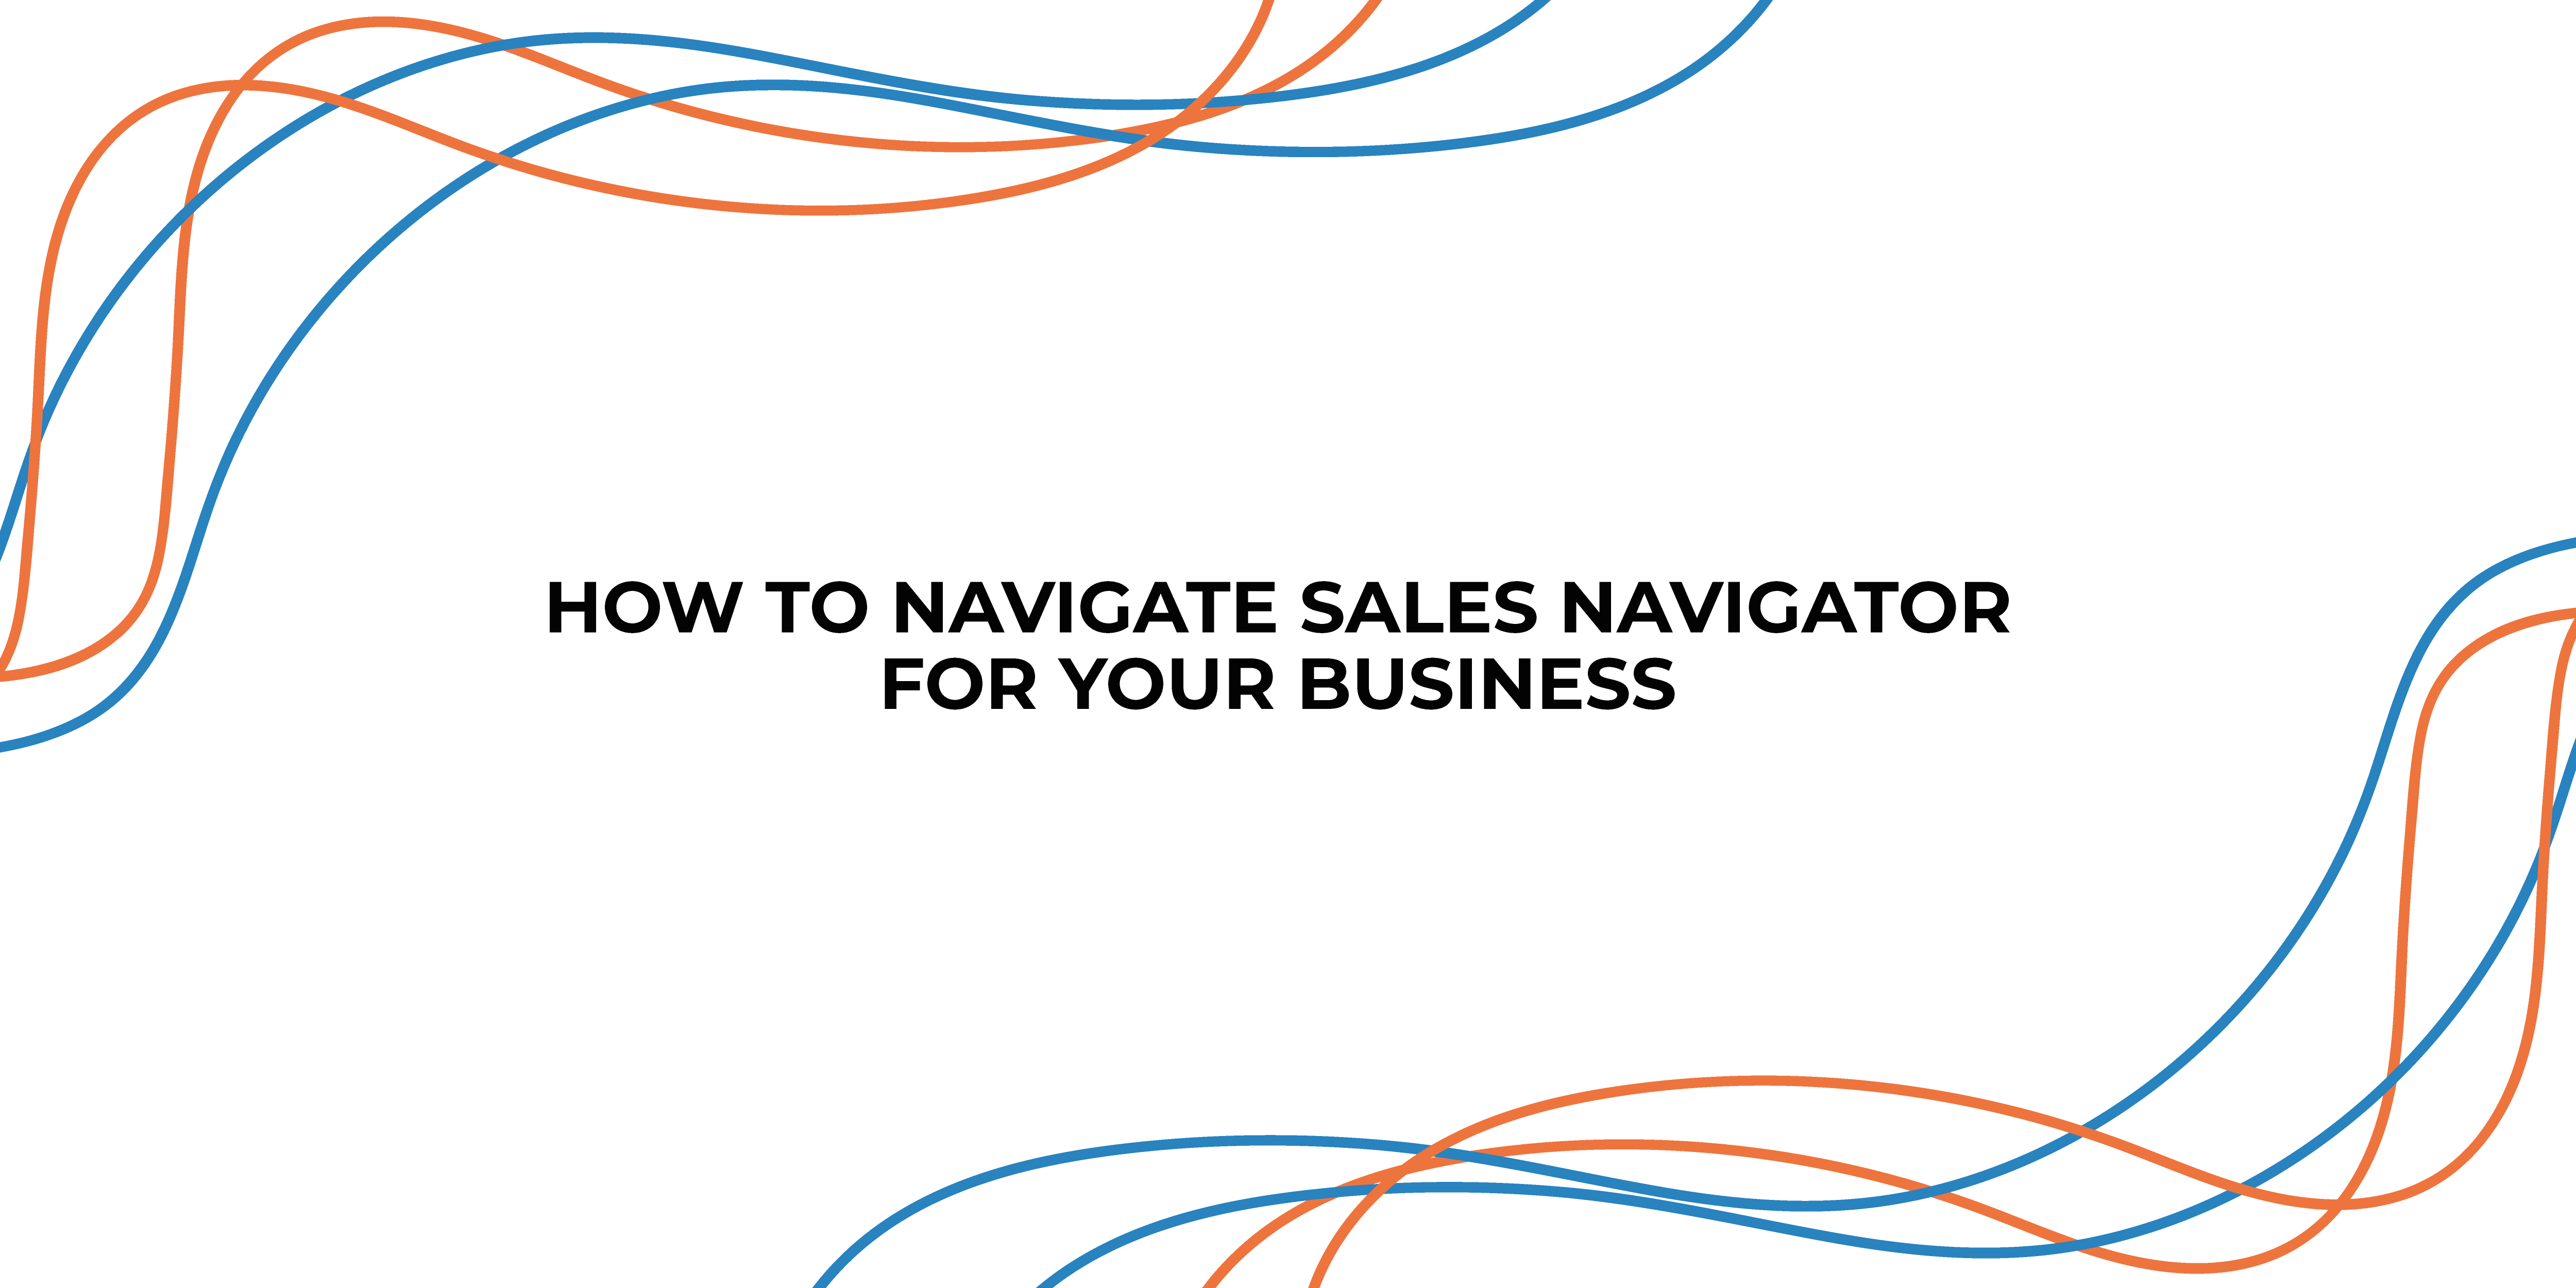 HOW TO NAVIGATE SALES NAVIGATOR FOR YOUR BUSINESS